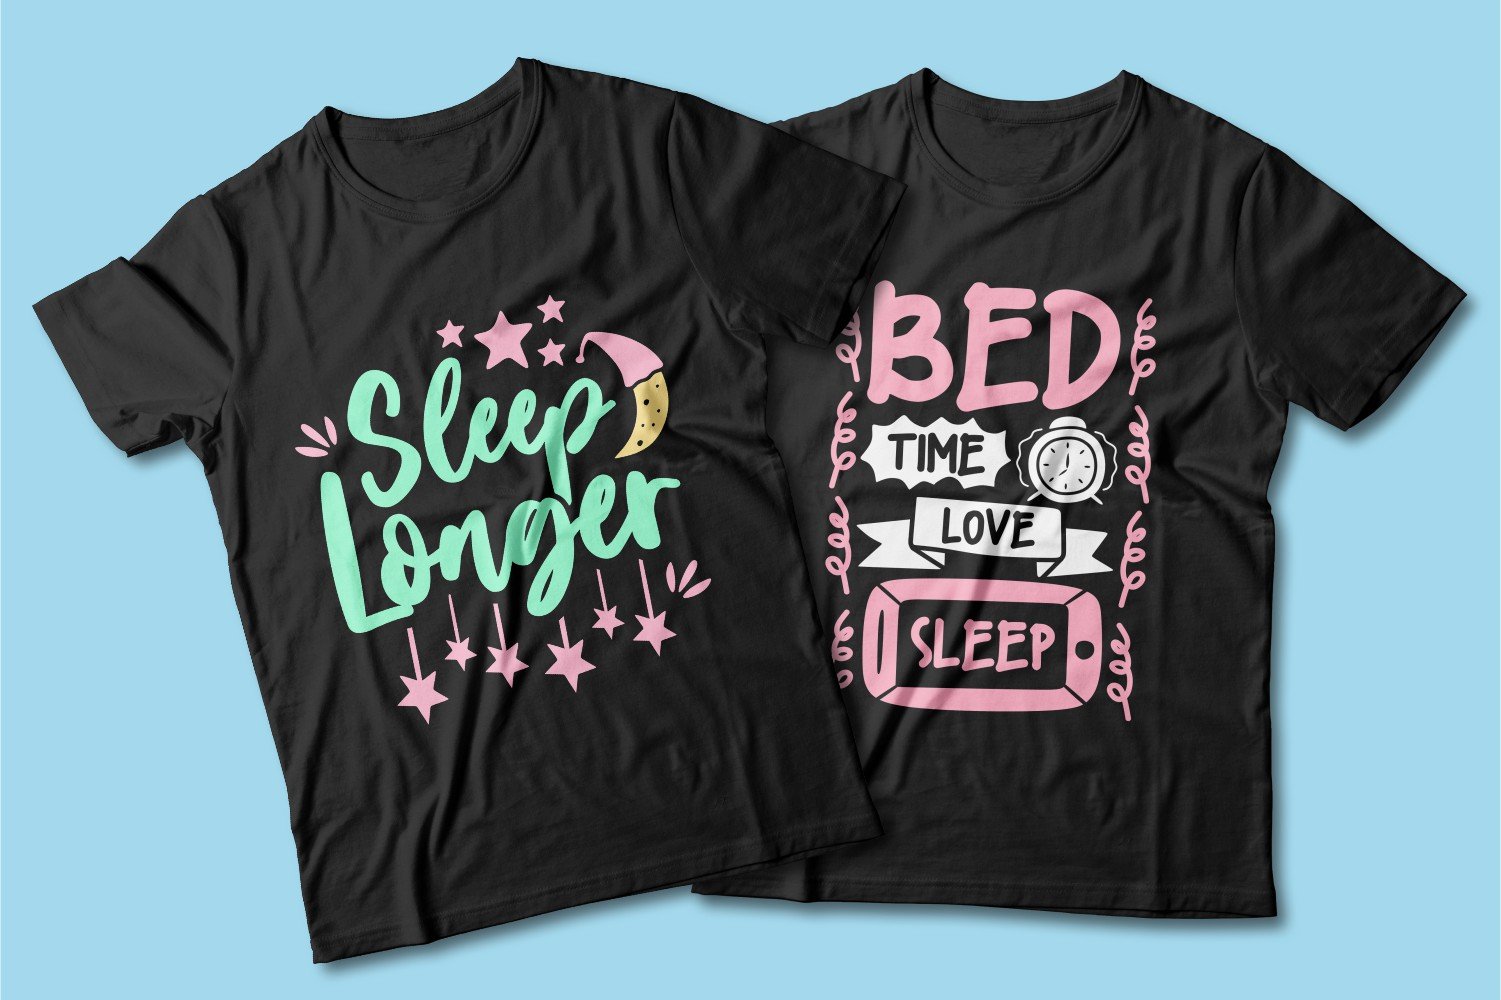 Two black T-shirts with a crew neck and a graphic lettering.